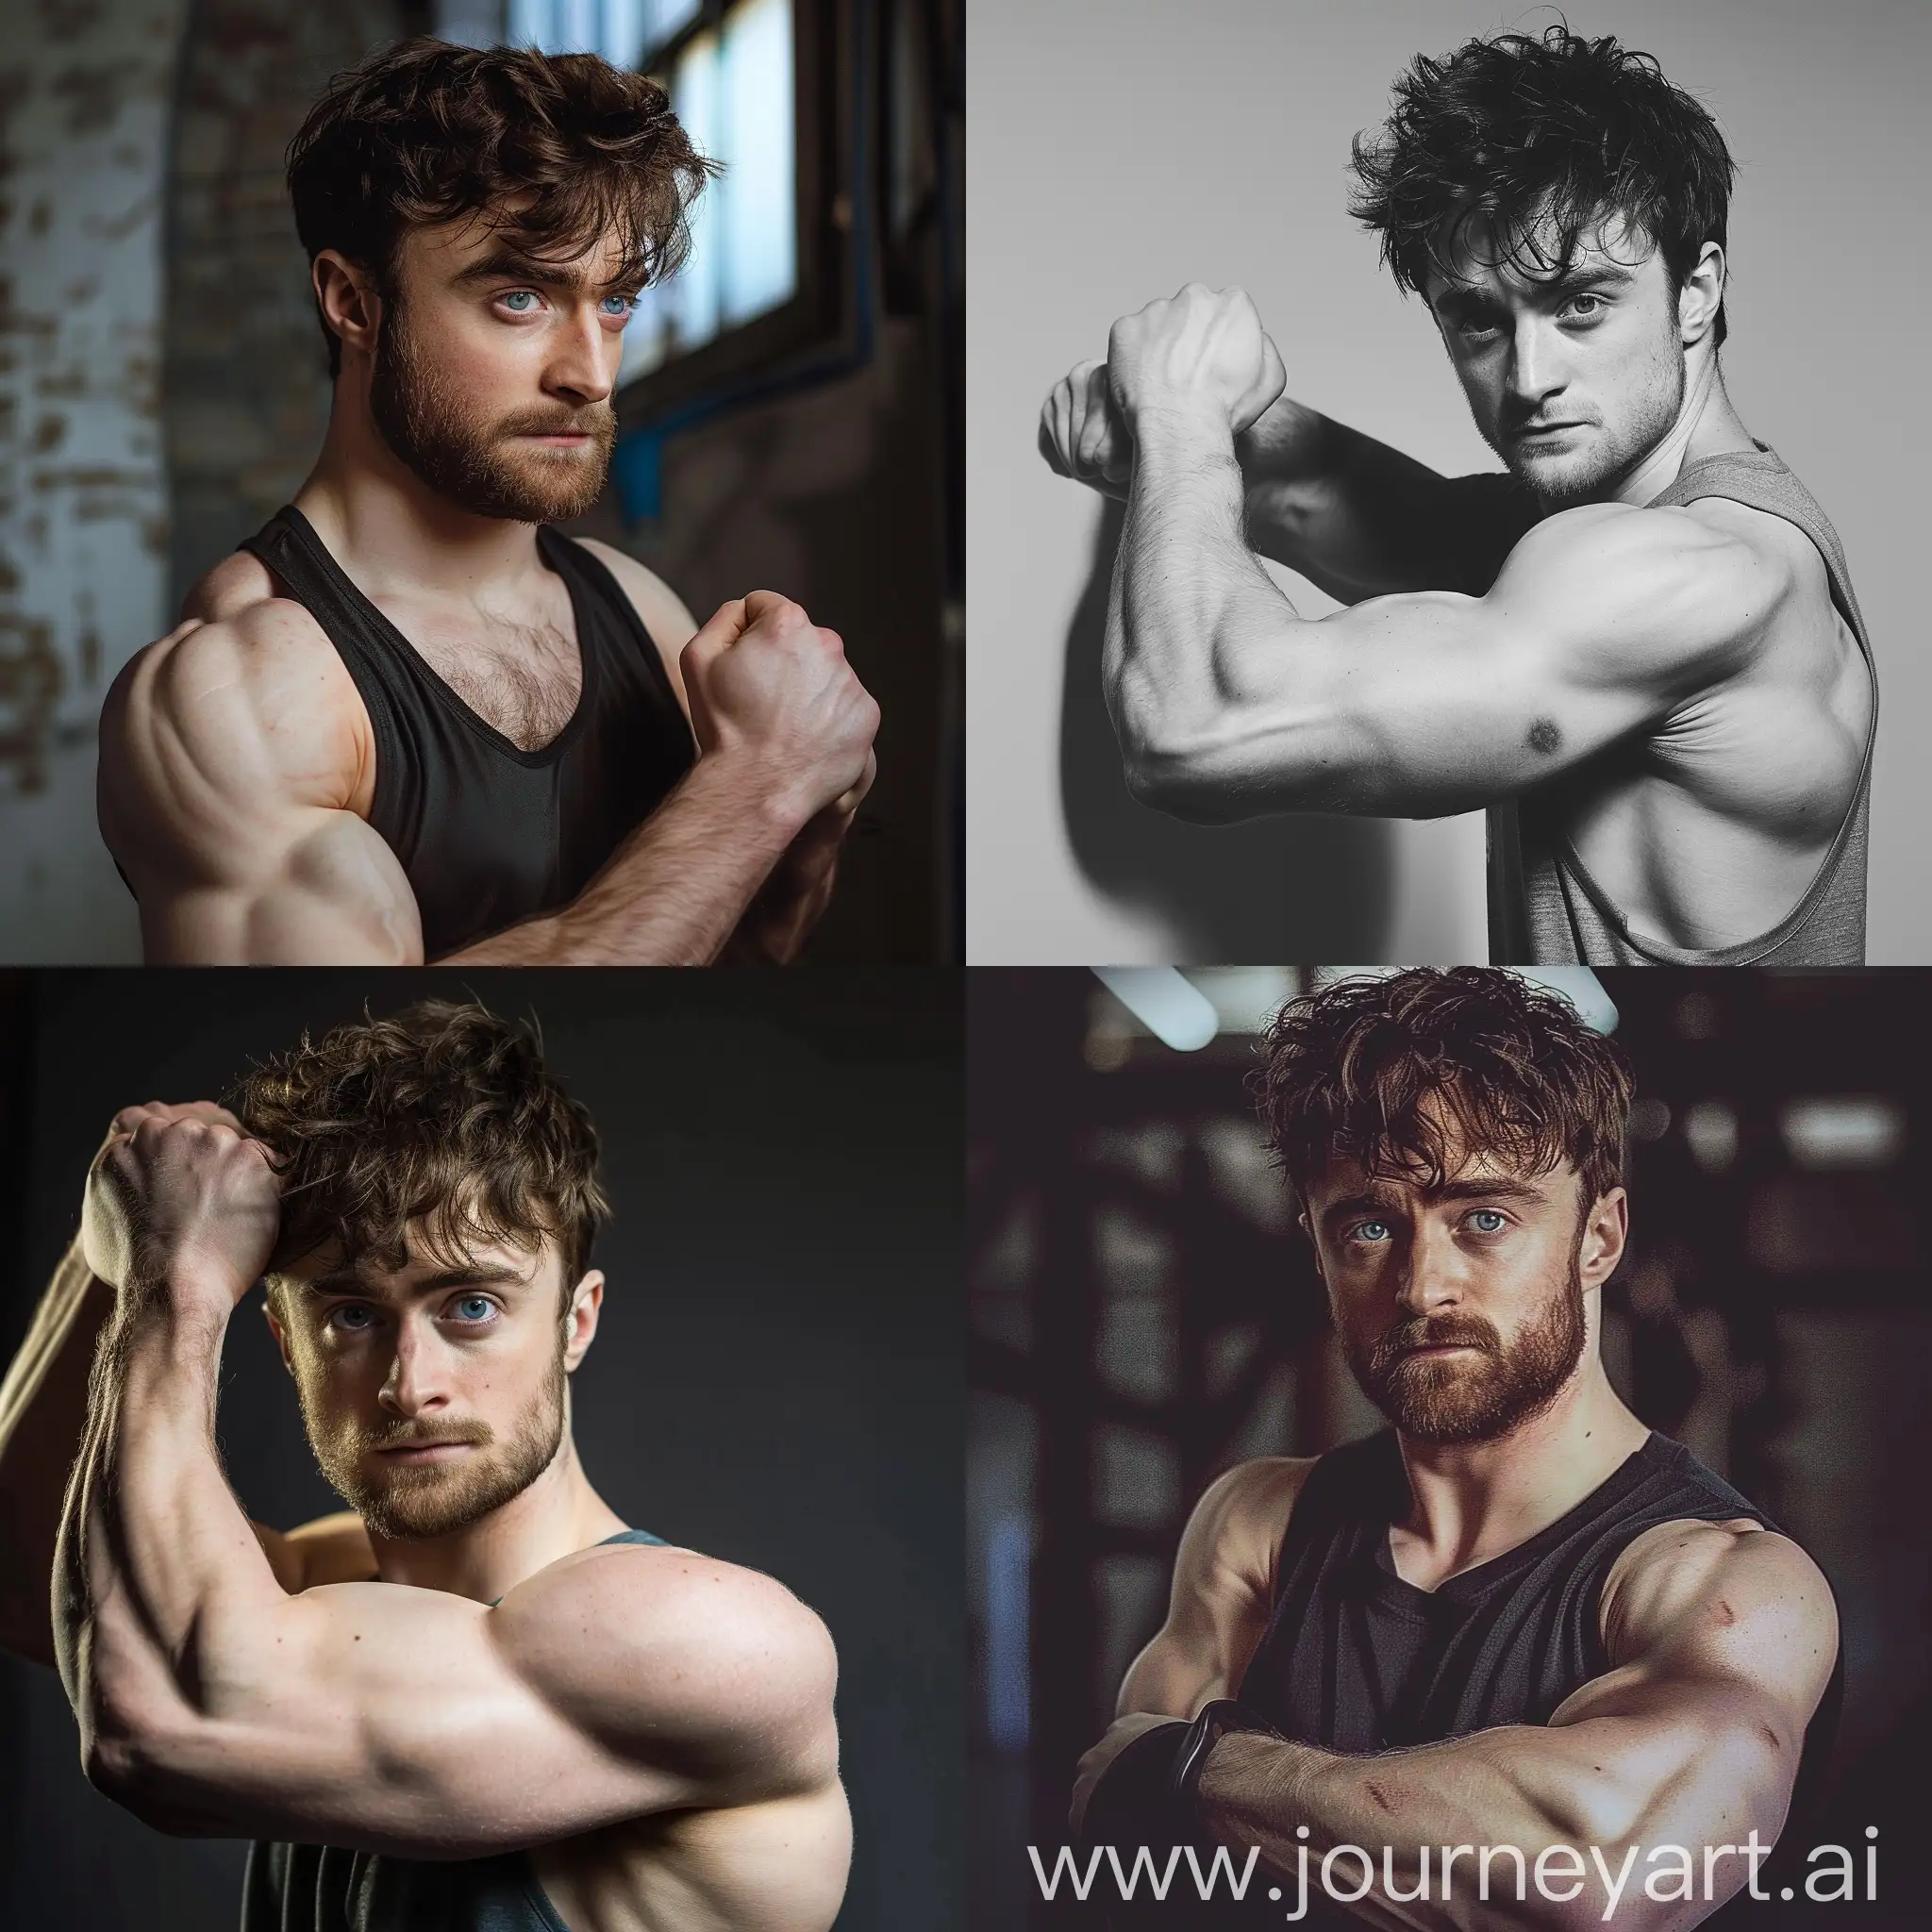 Daniel radcliffe with muscular biceps